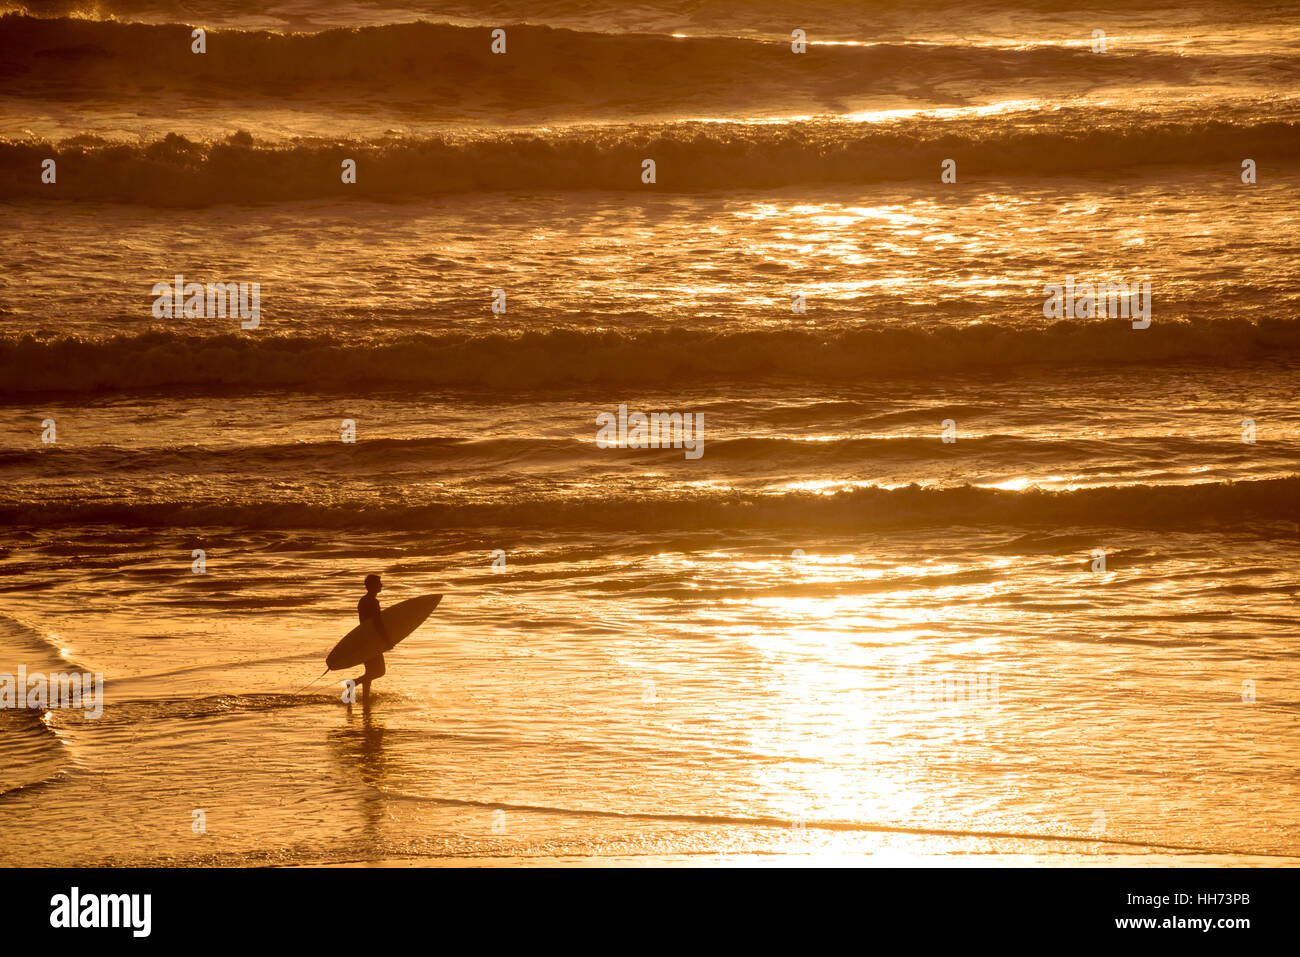 Silhouette of a surfer at sunset on the atlantic ocean, Lacanau France Stock Photo